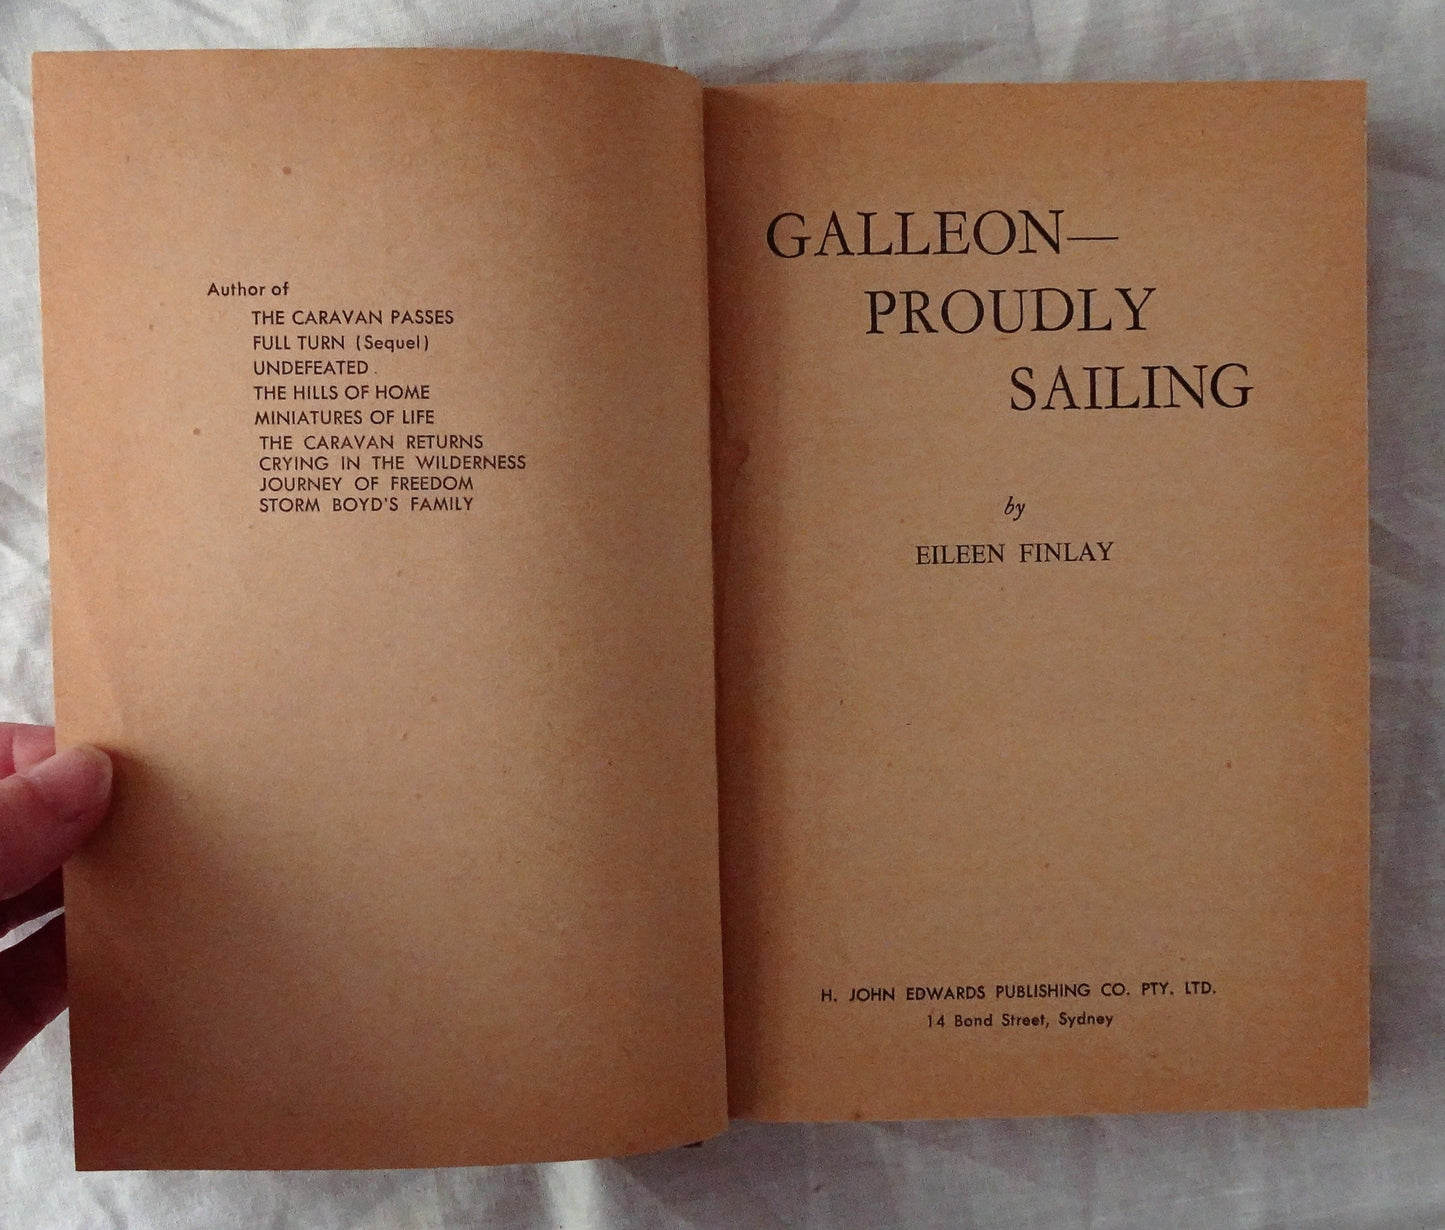 Galleon Proudly Sailing by Eileen Finlay